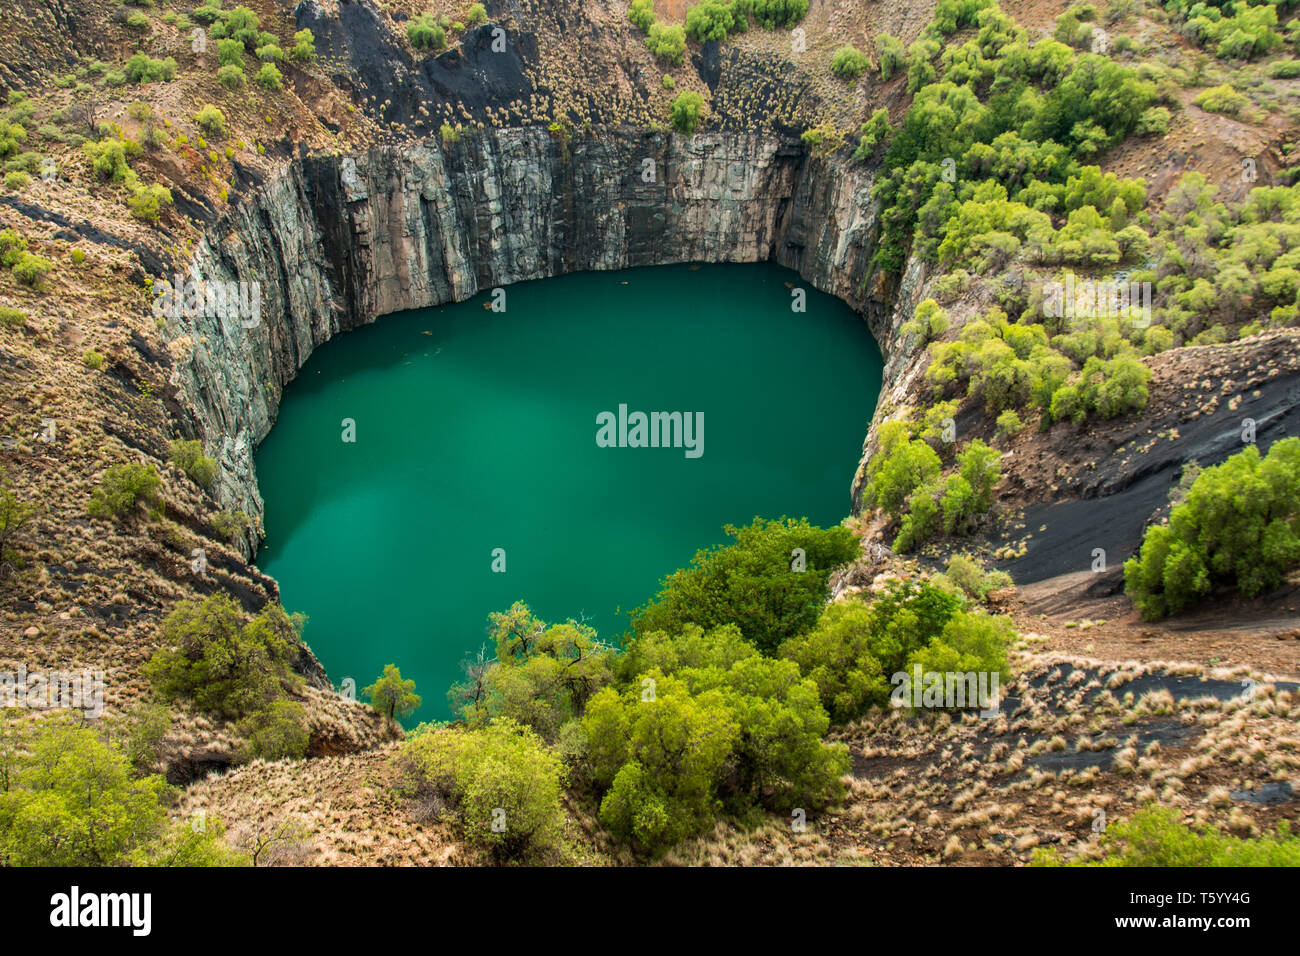 The Big Hole In Kimberley A Historical Landmark And Result Of The